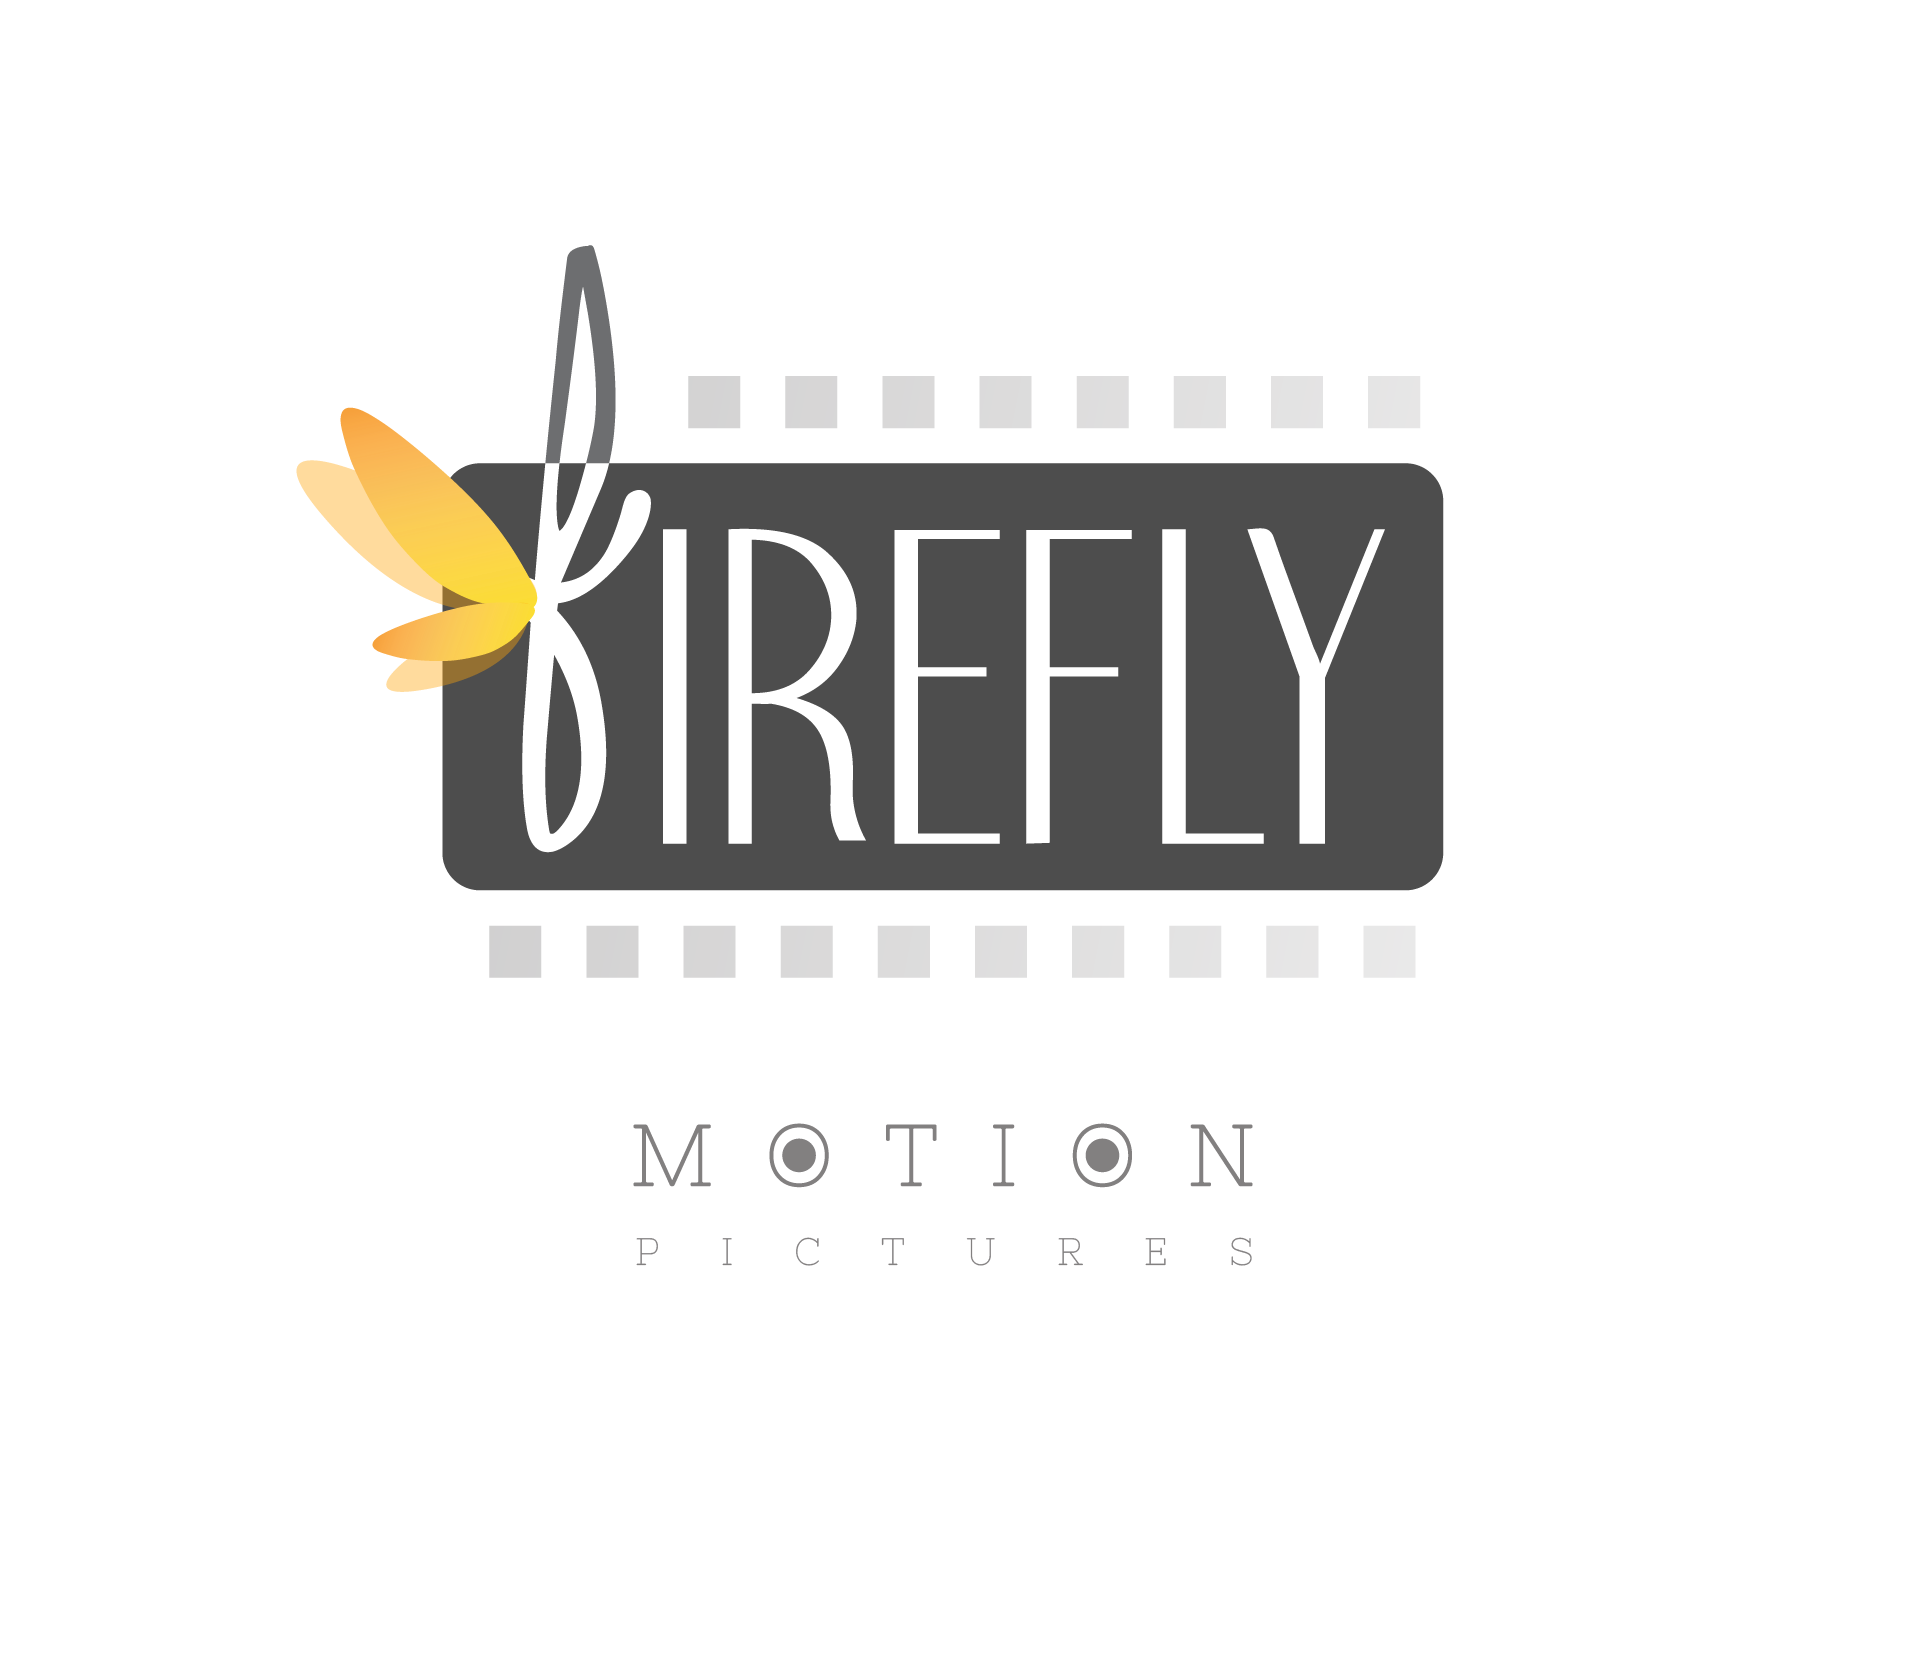 Firefly Motion Pictures profile on Qualified.One